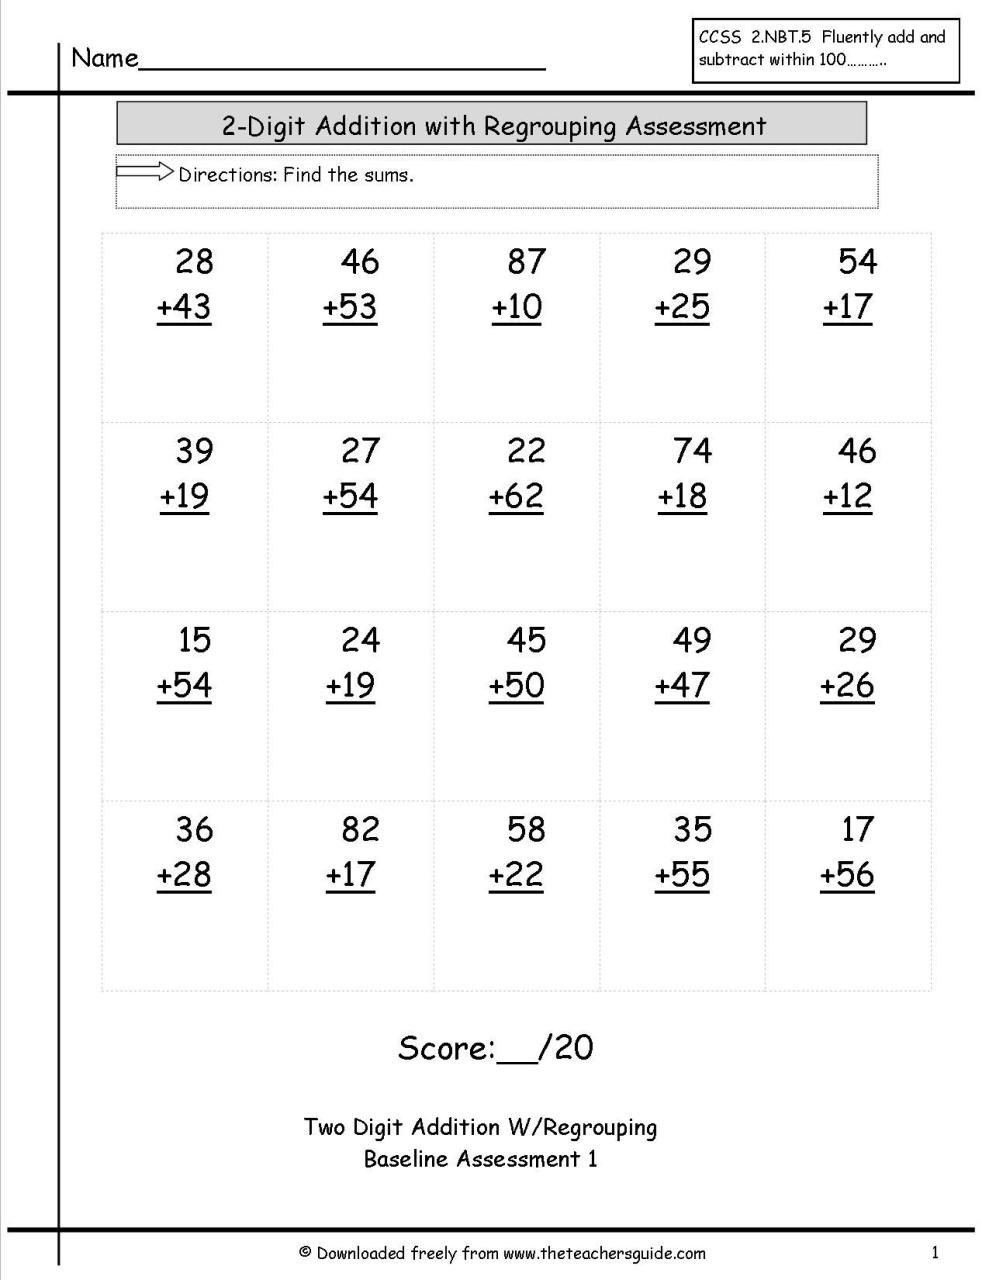 3 Digit Addition Without Regrouping Pdf